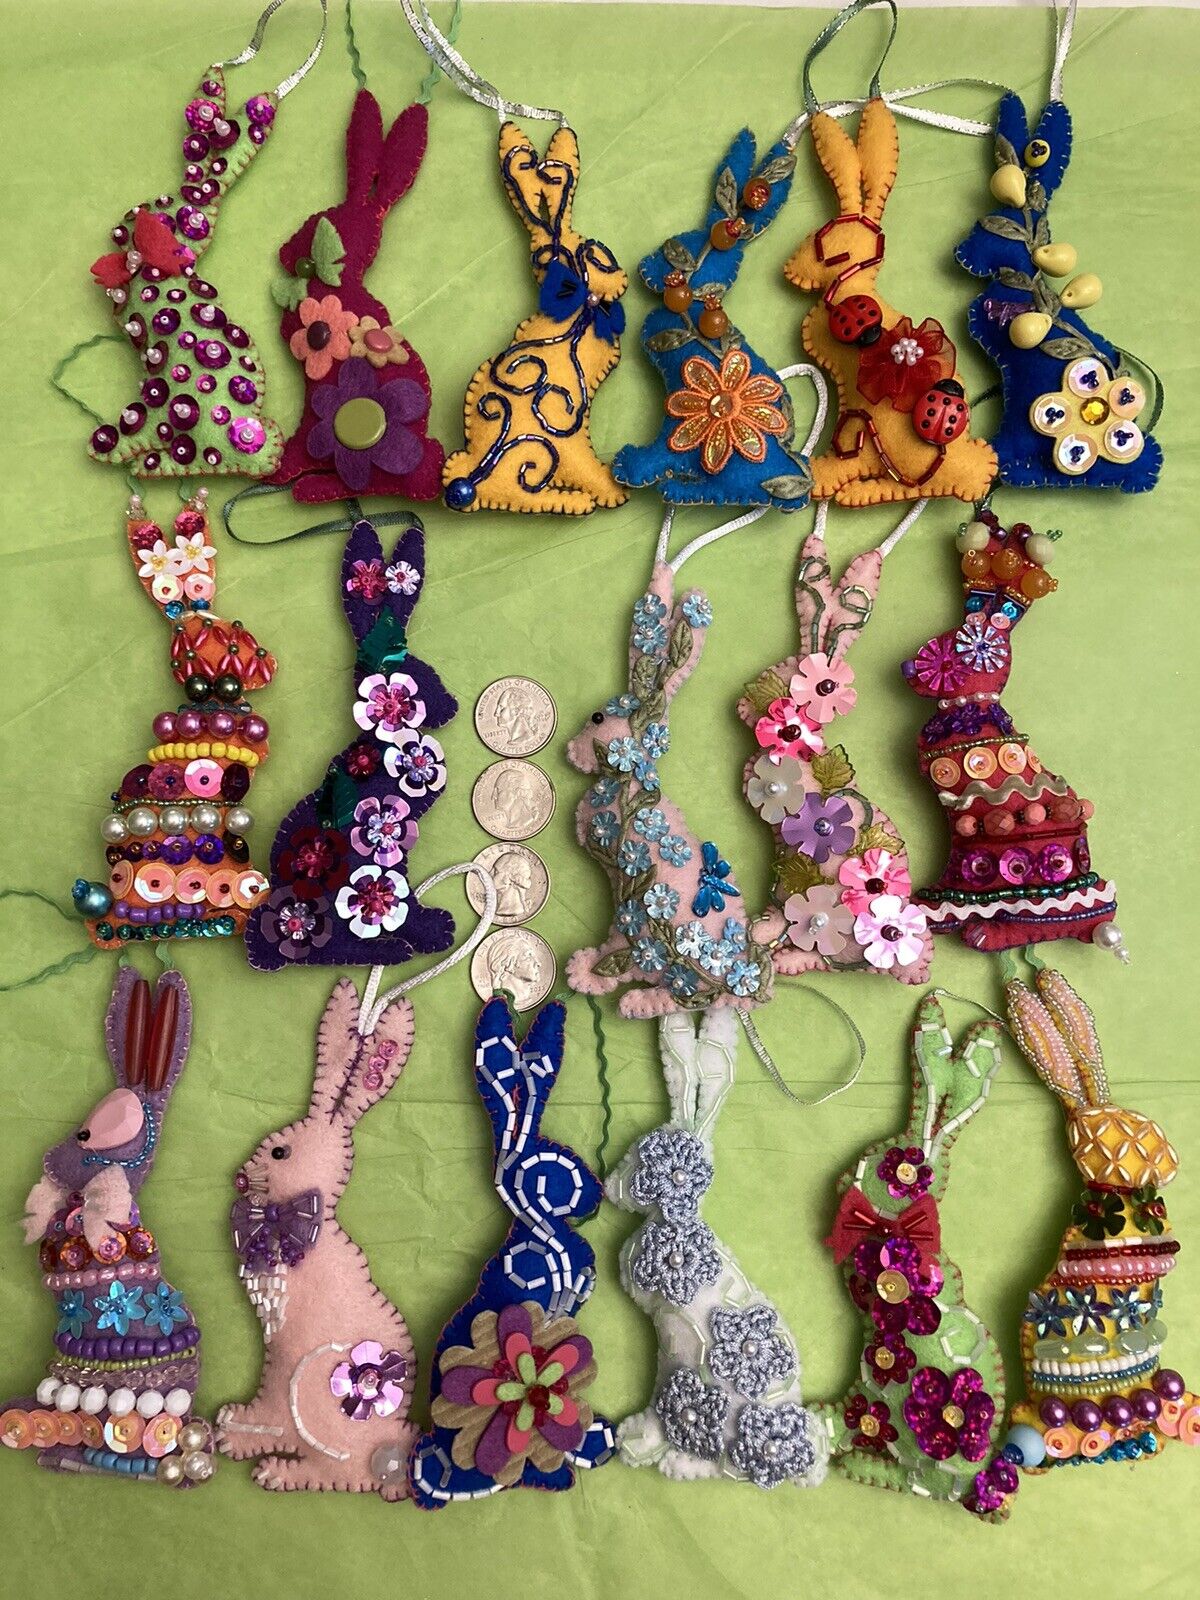 Hand beaded Easter Bunny Ornaments